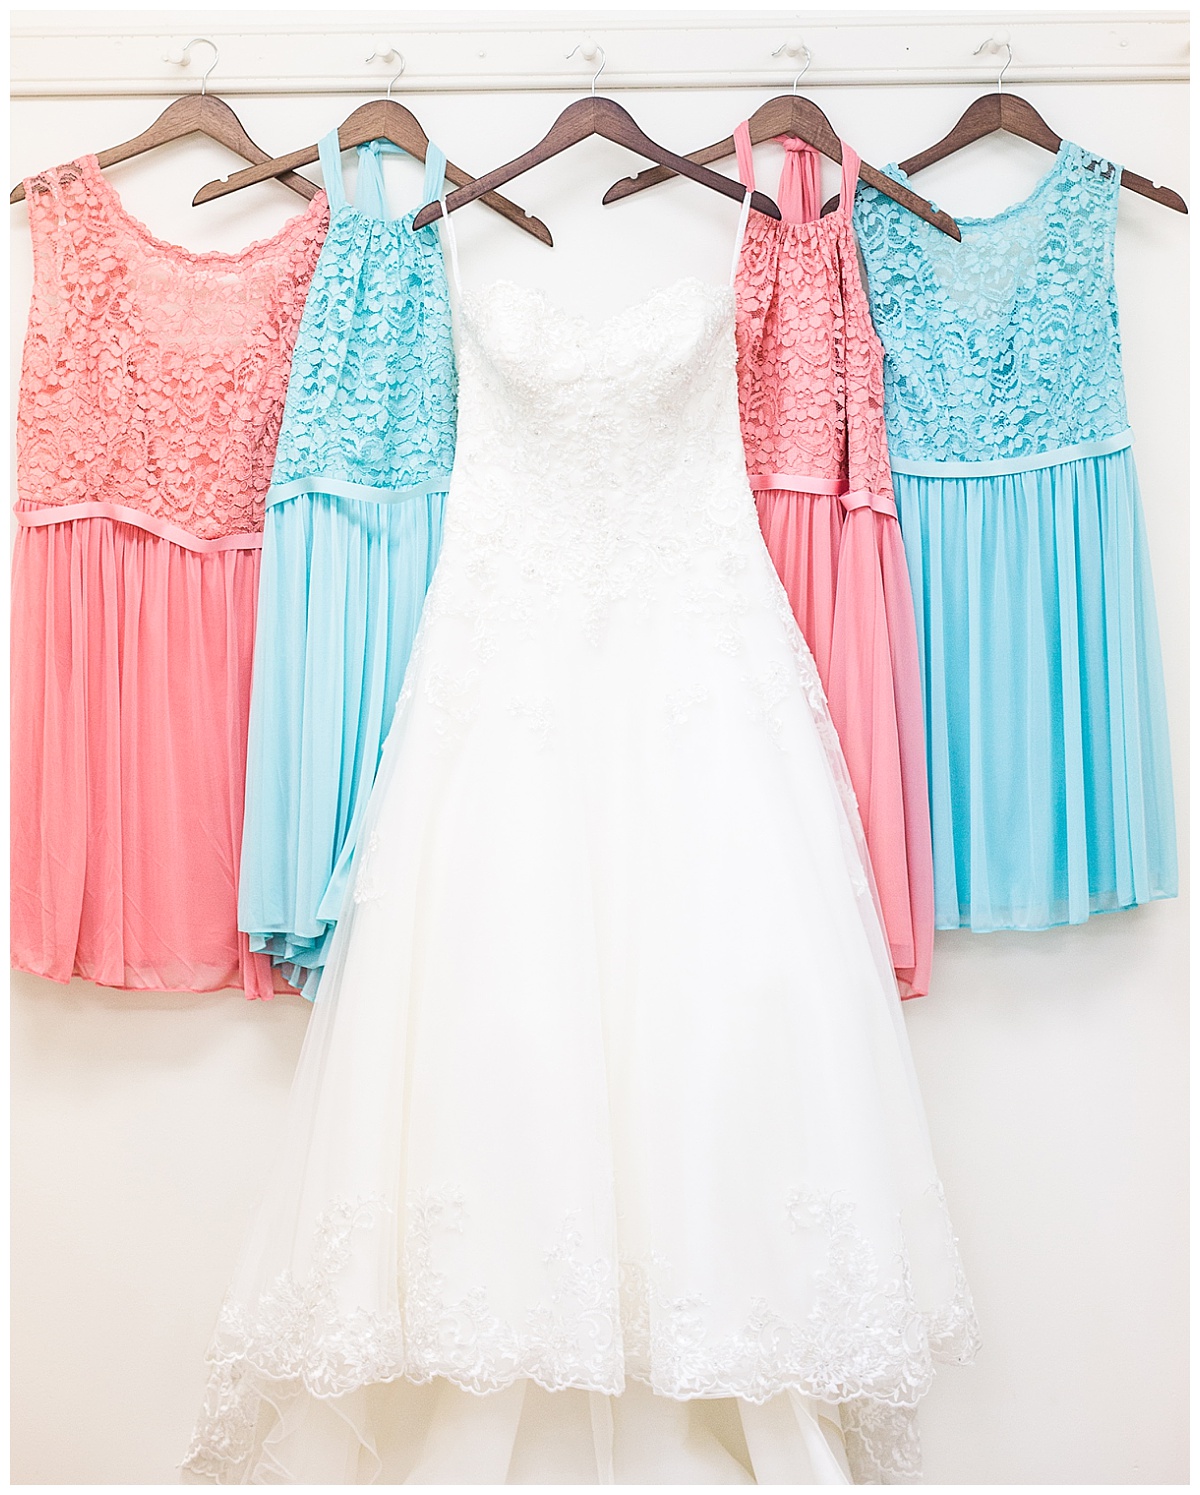 wedding gown hung with teal and coral bridesmaids dresses